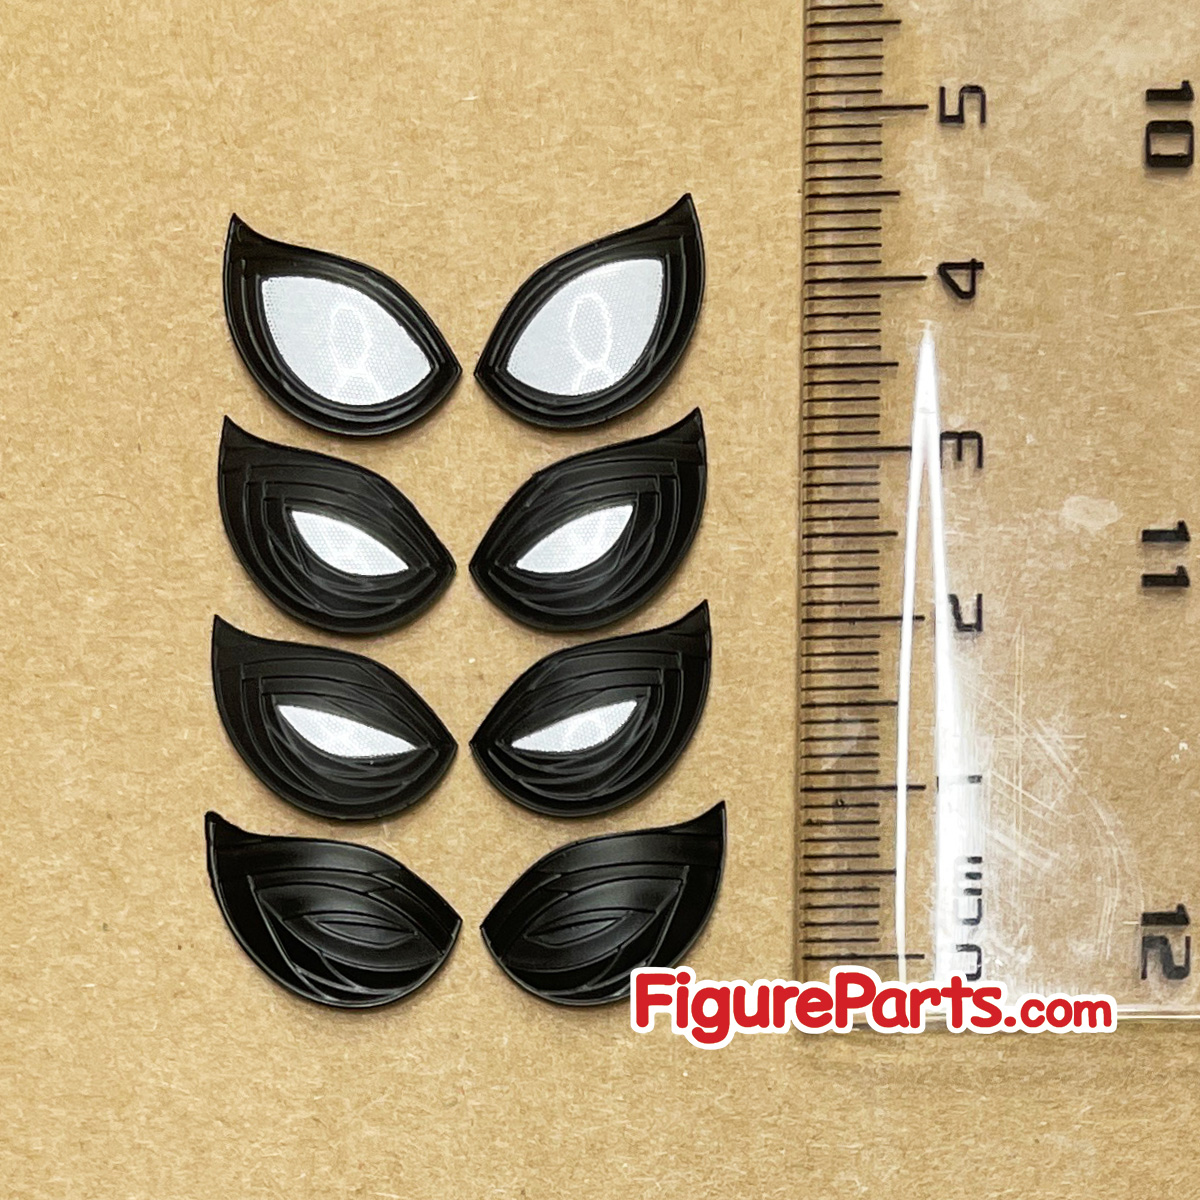 Magnetic Eye Pieces - Spiderman Upgraded Suit - Far From Home - Hot Toys mms542